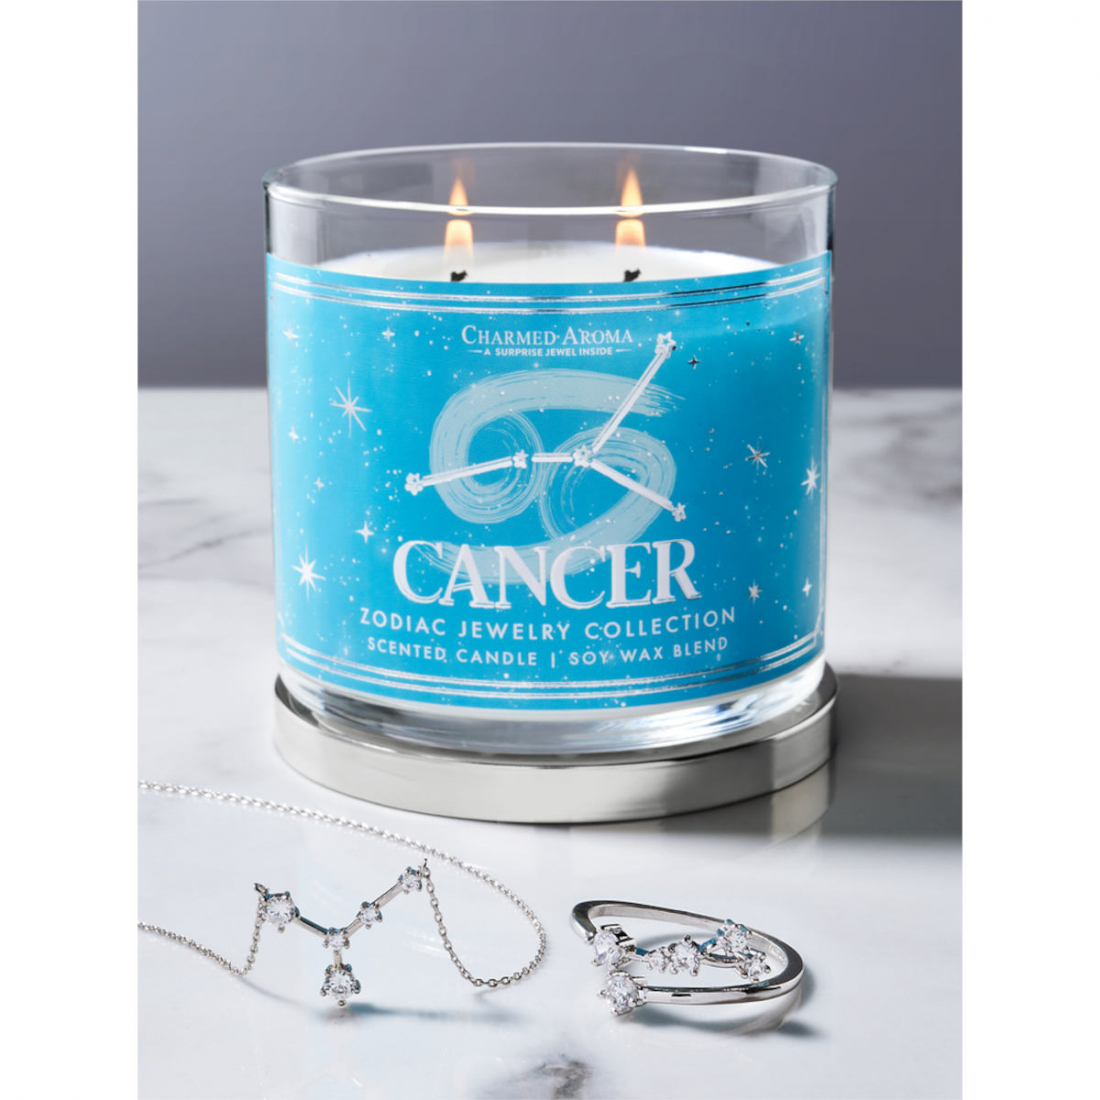 Women's 'Cancer' Candle Set - 700 g